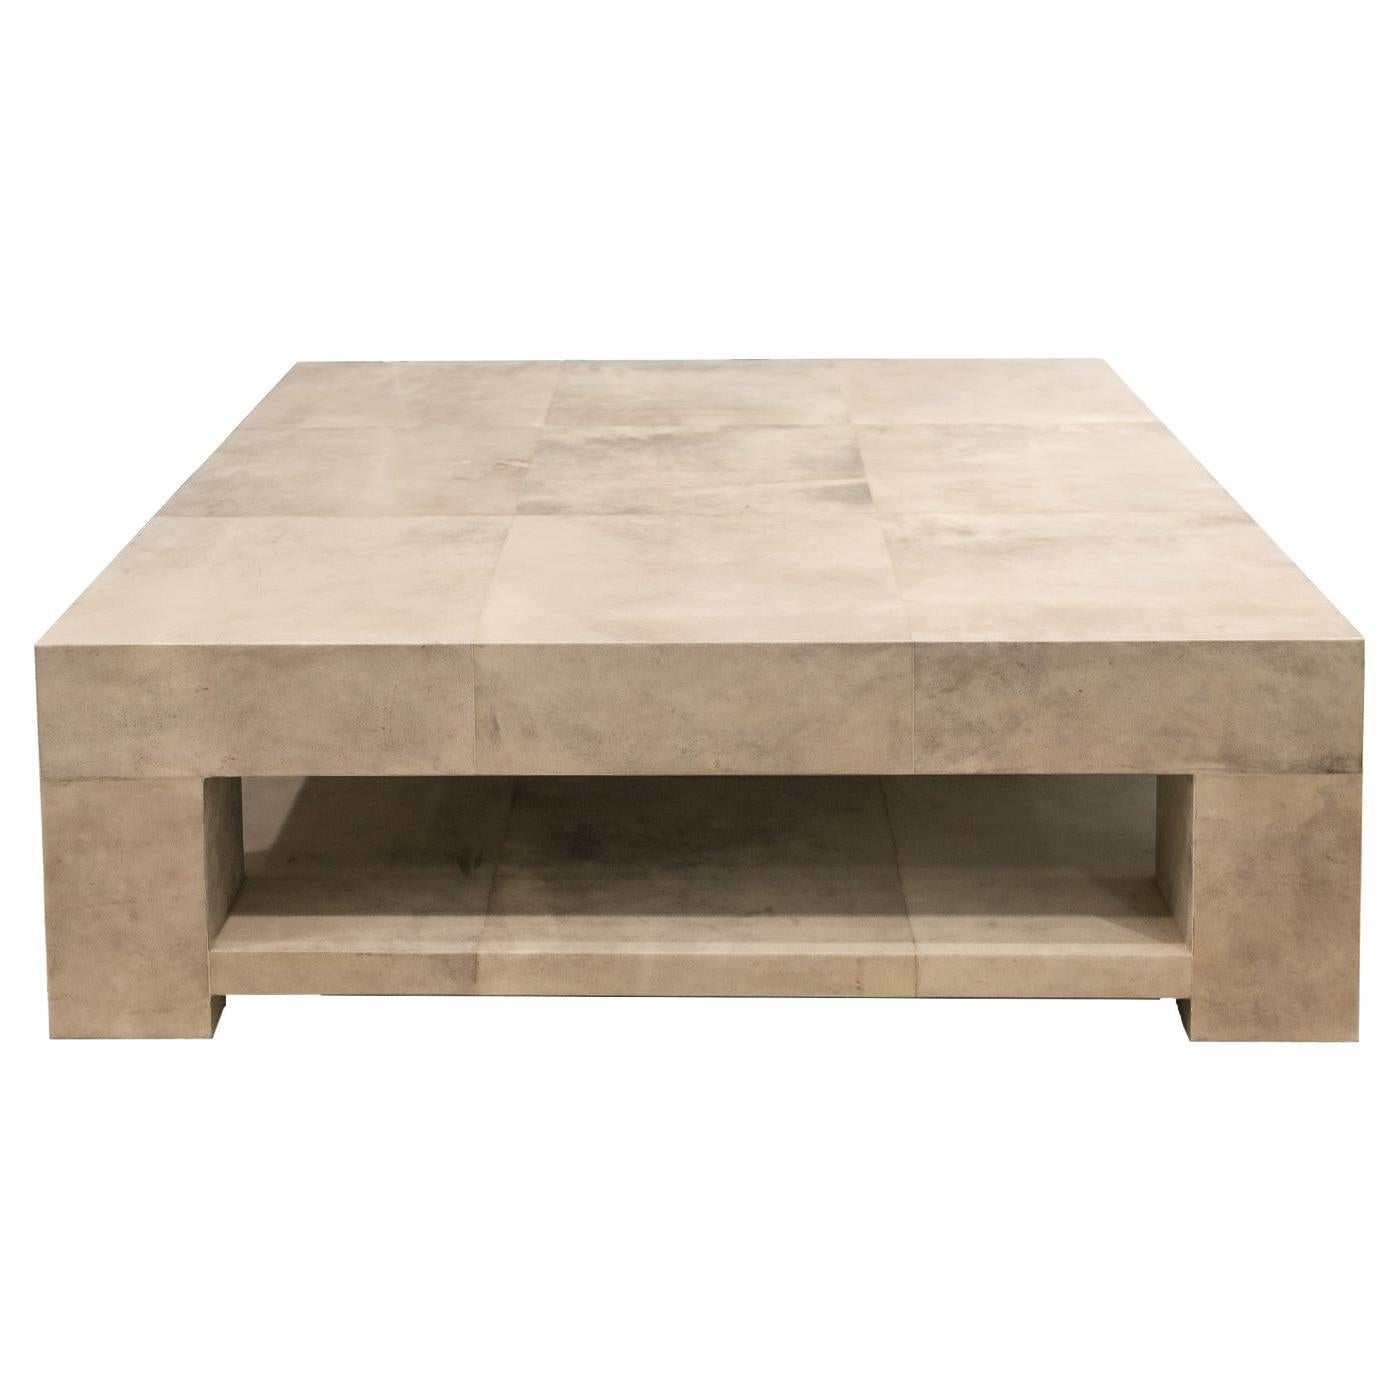 Lobel Originals Custom 2-Tier Coffee Table in Lacquered Goatskin, Made to Order